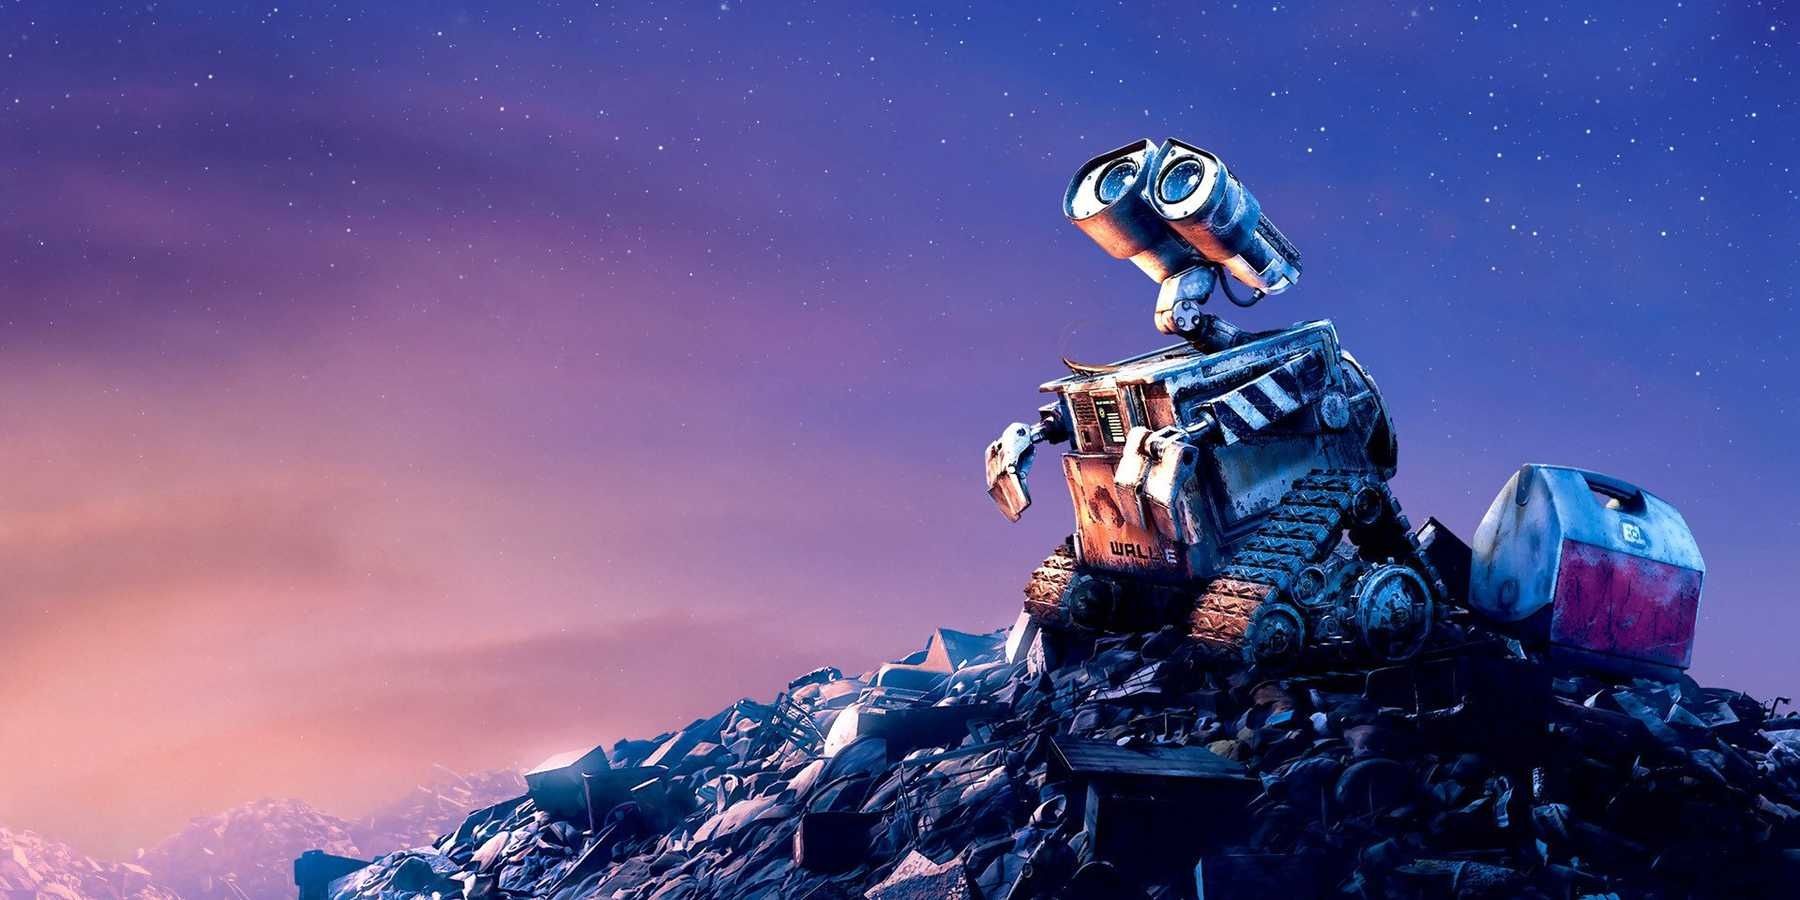 Wall E SITTING ON TOP OF A PILE OF TRASH